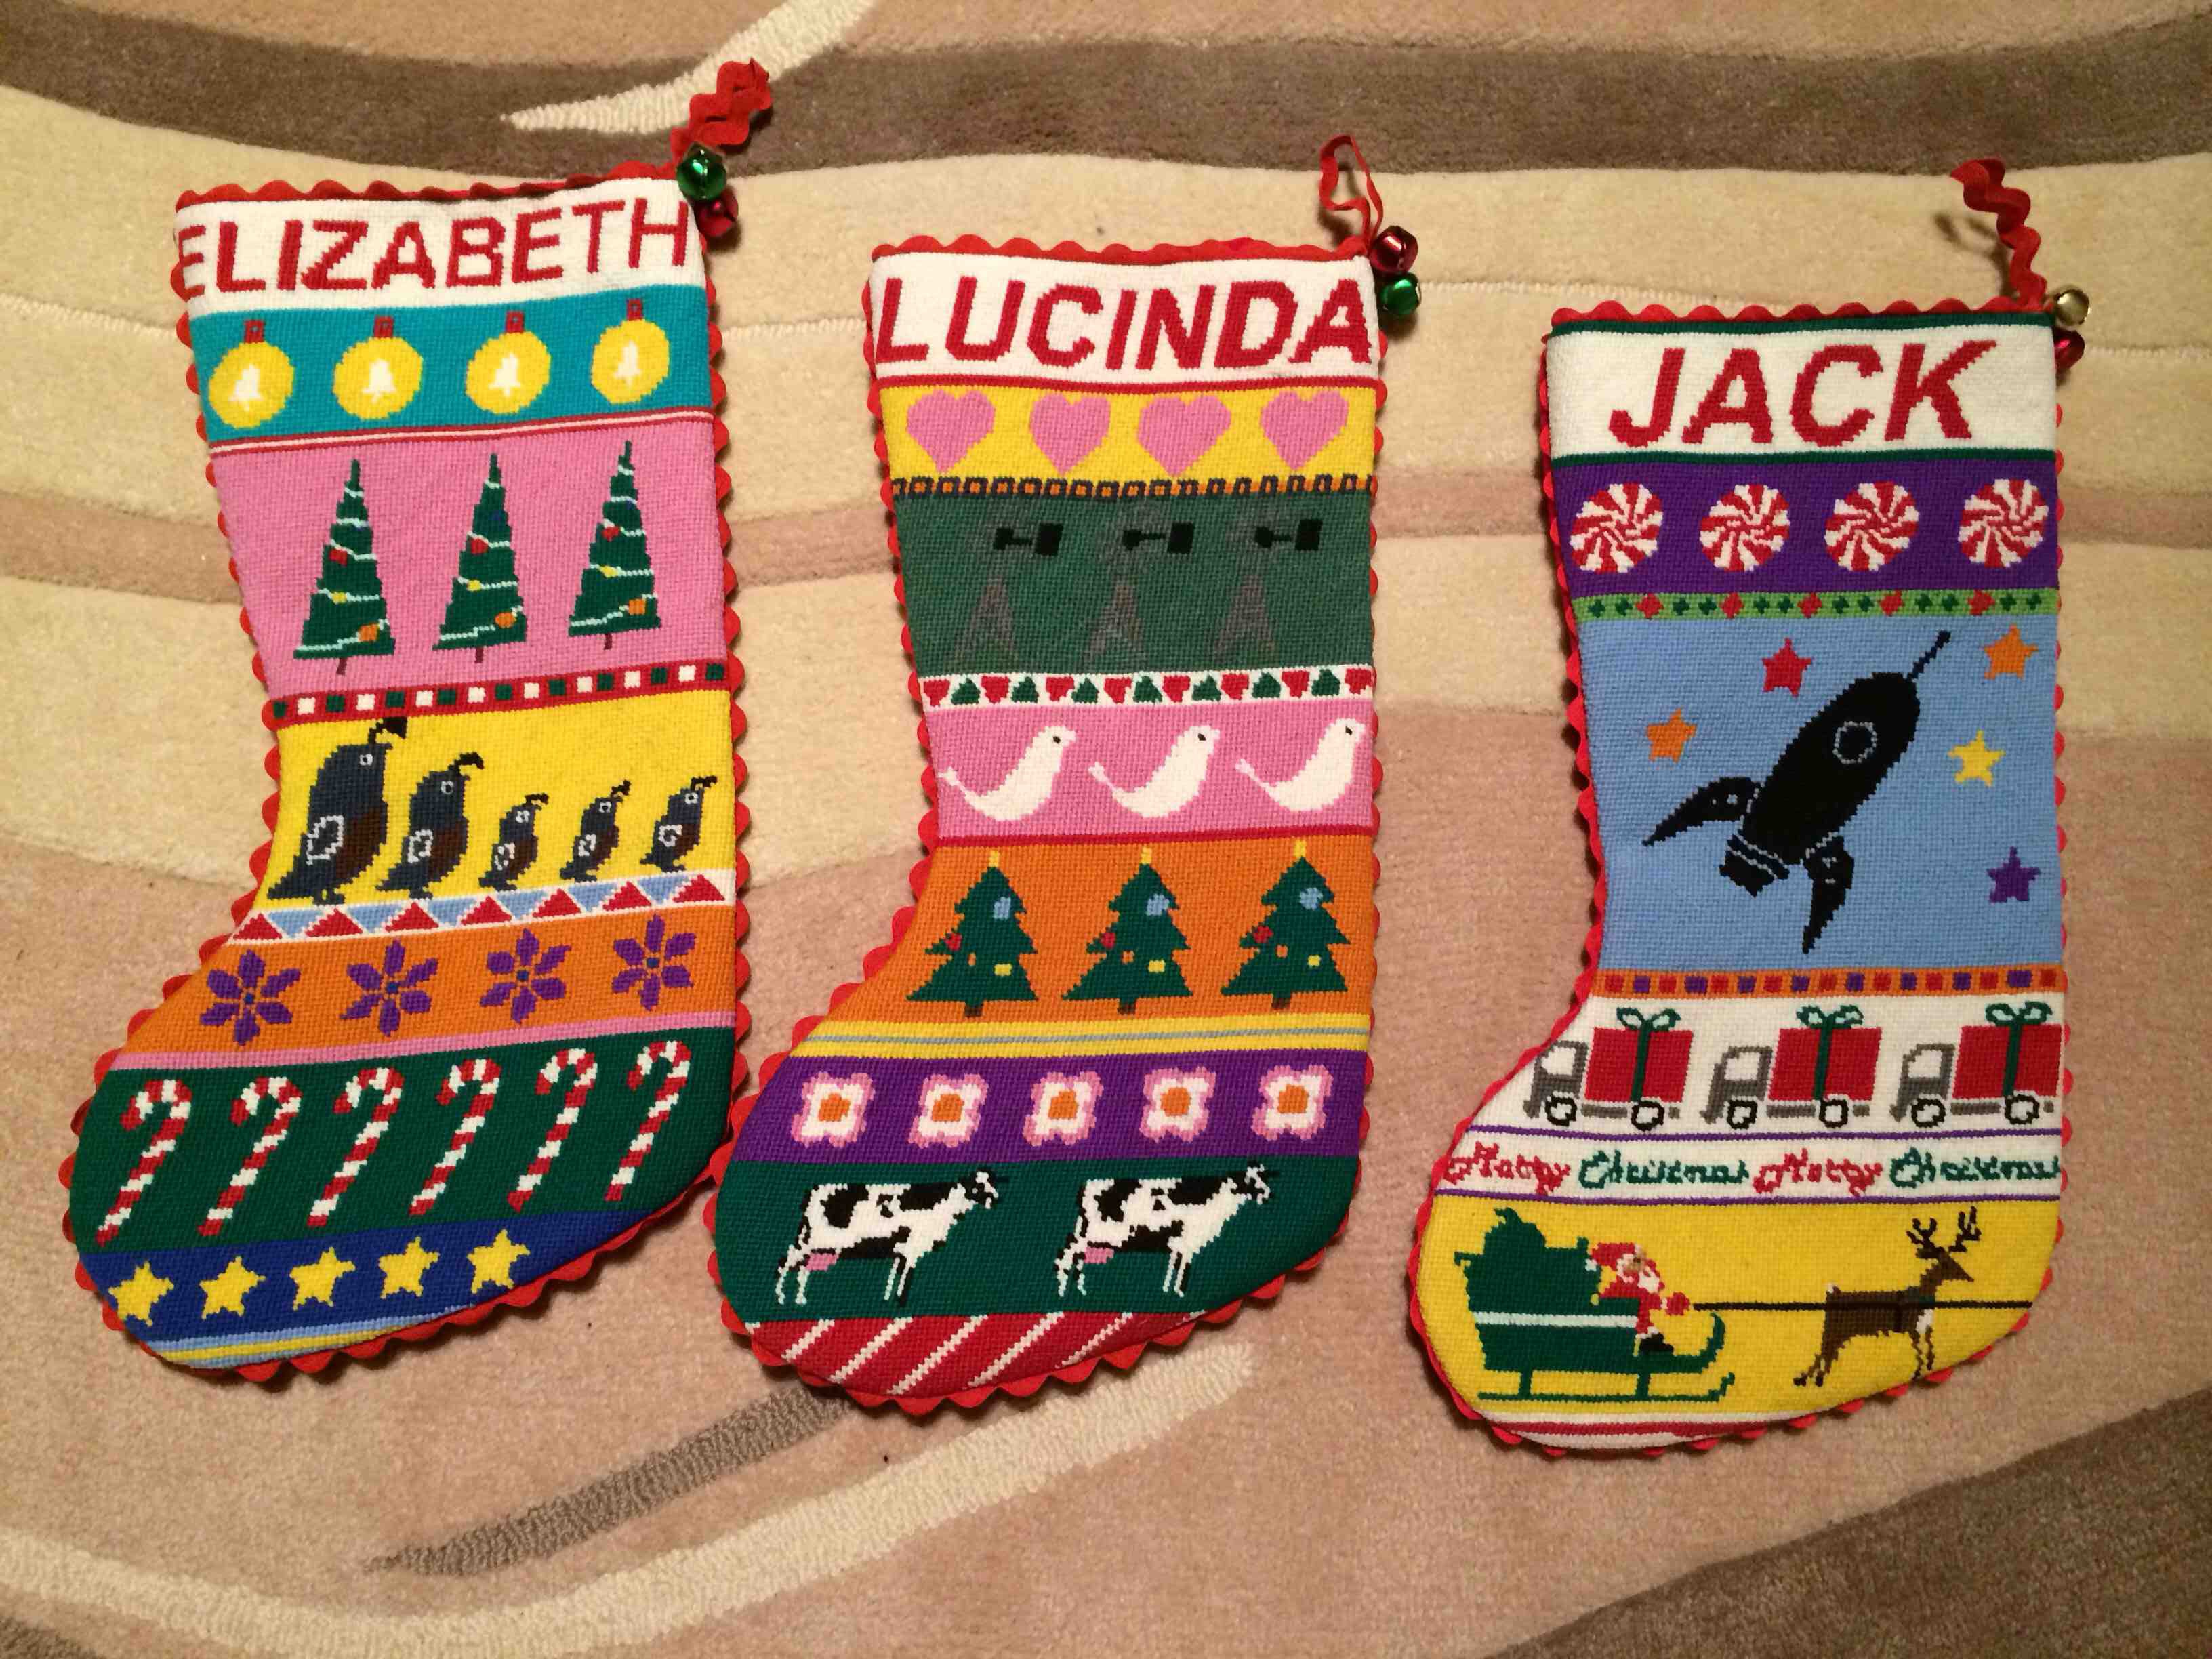 Customer Projects Stitched! Needlepoint Stockings, Dogs, and Belts